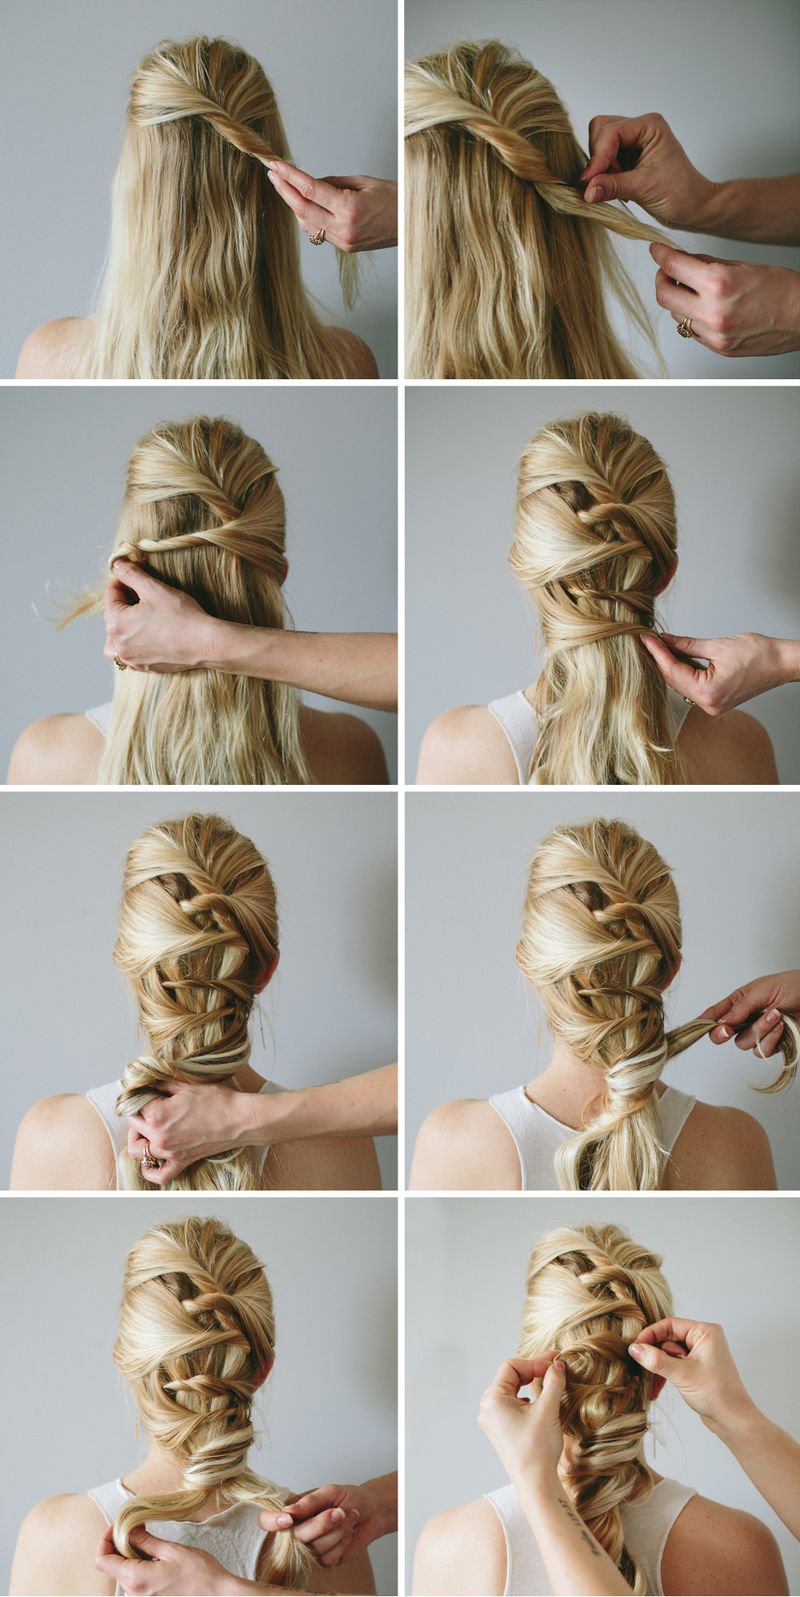 Easy Hairstyles Step by Step Pictures by Diego Correa Bonini